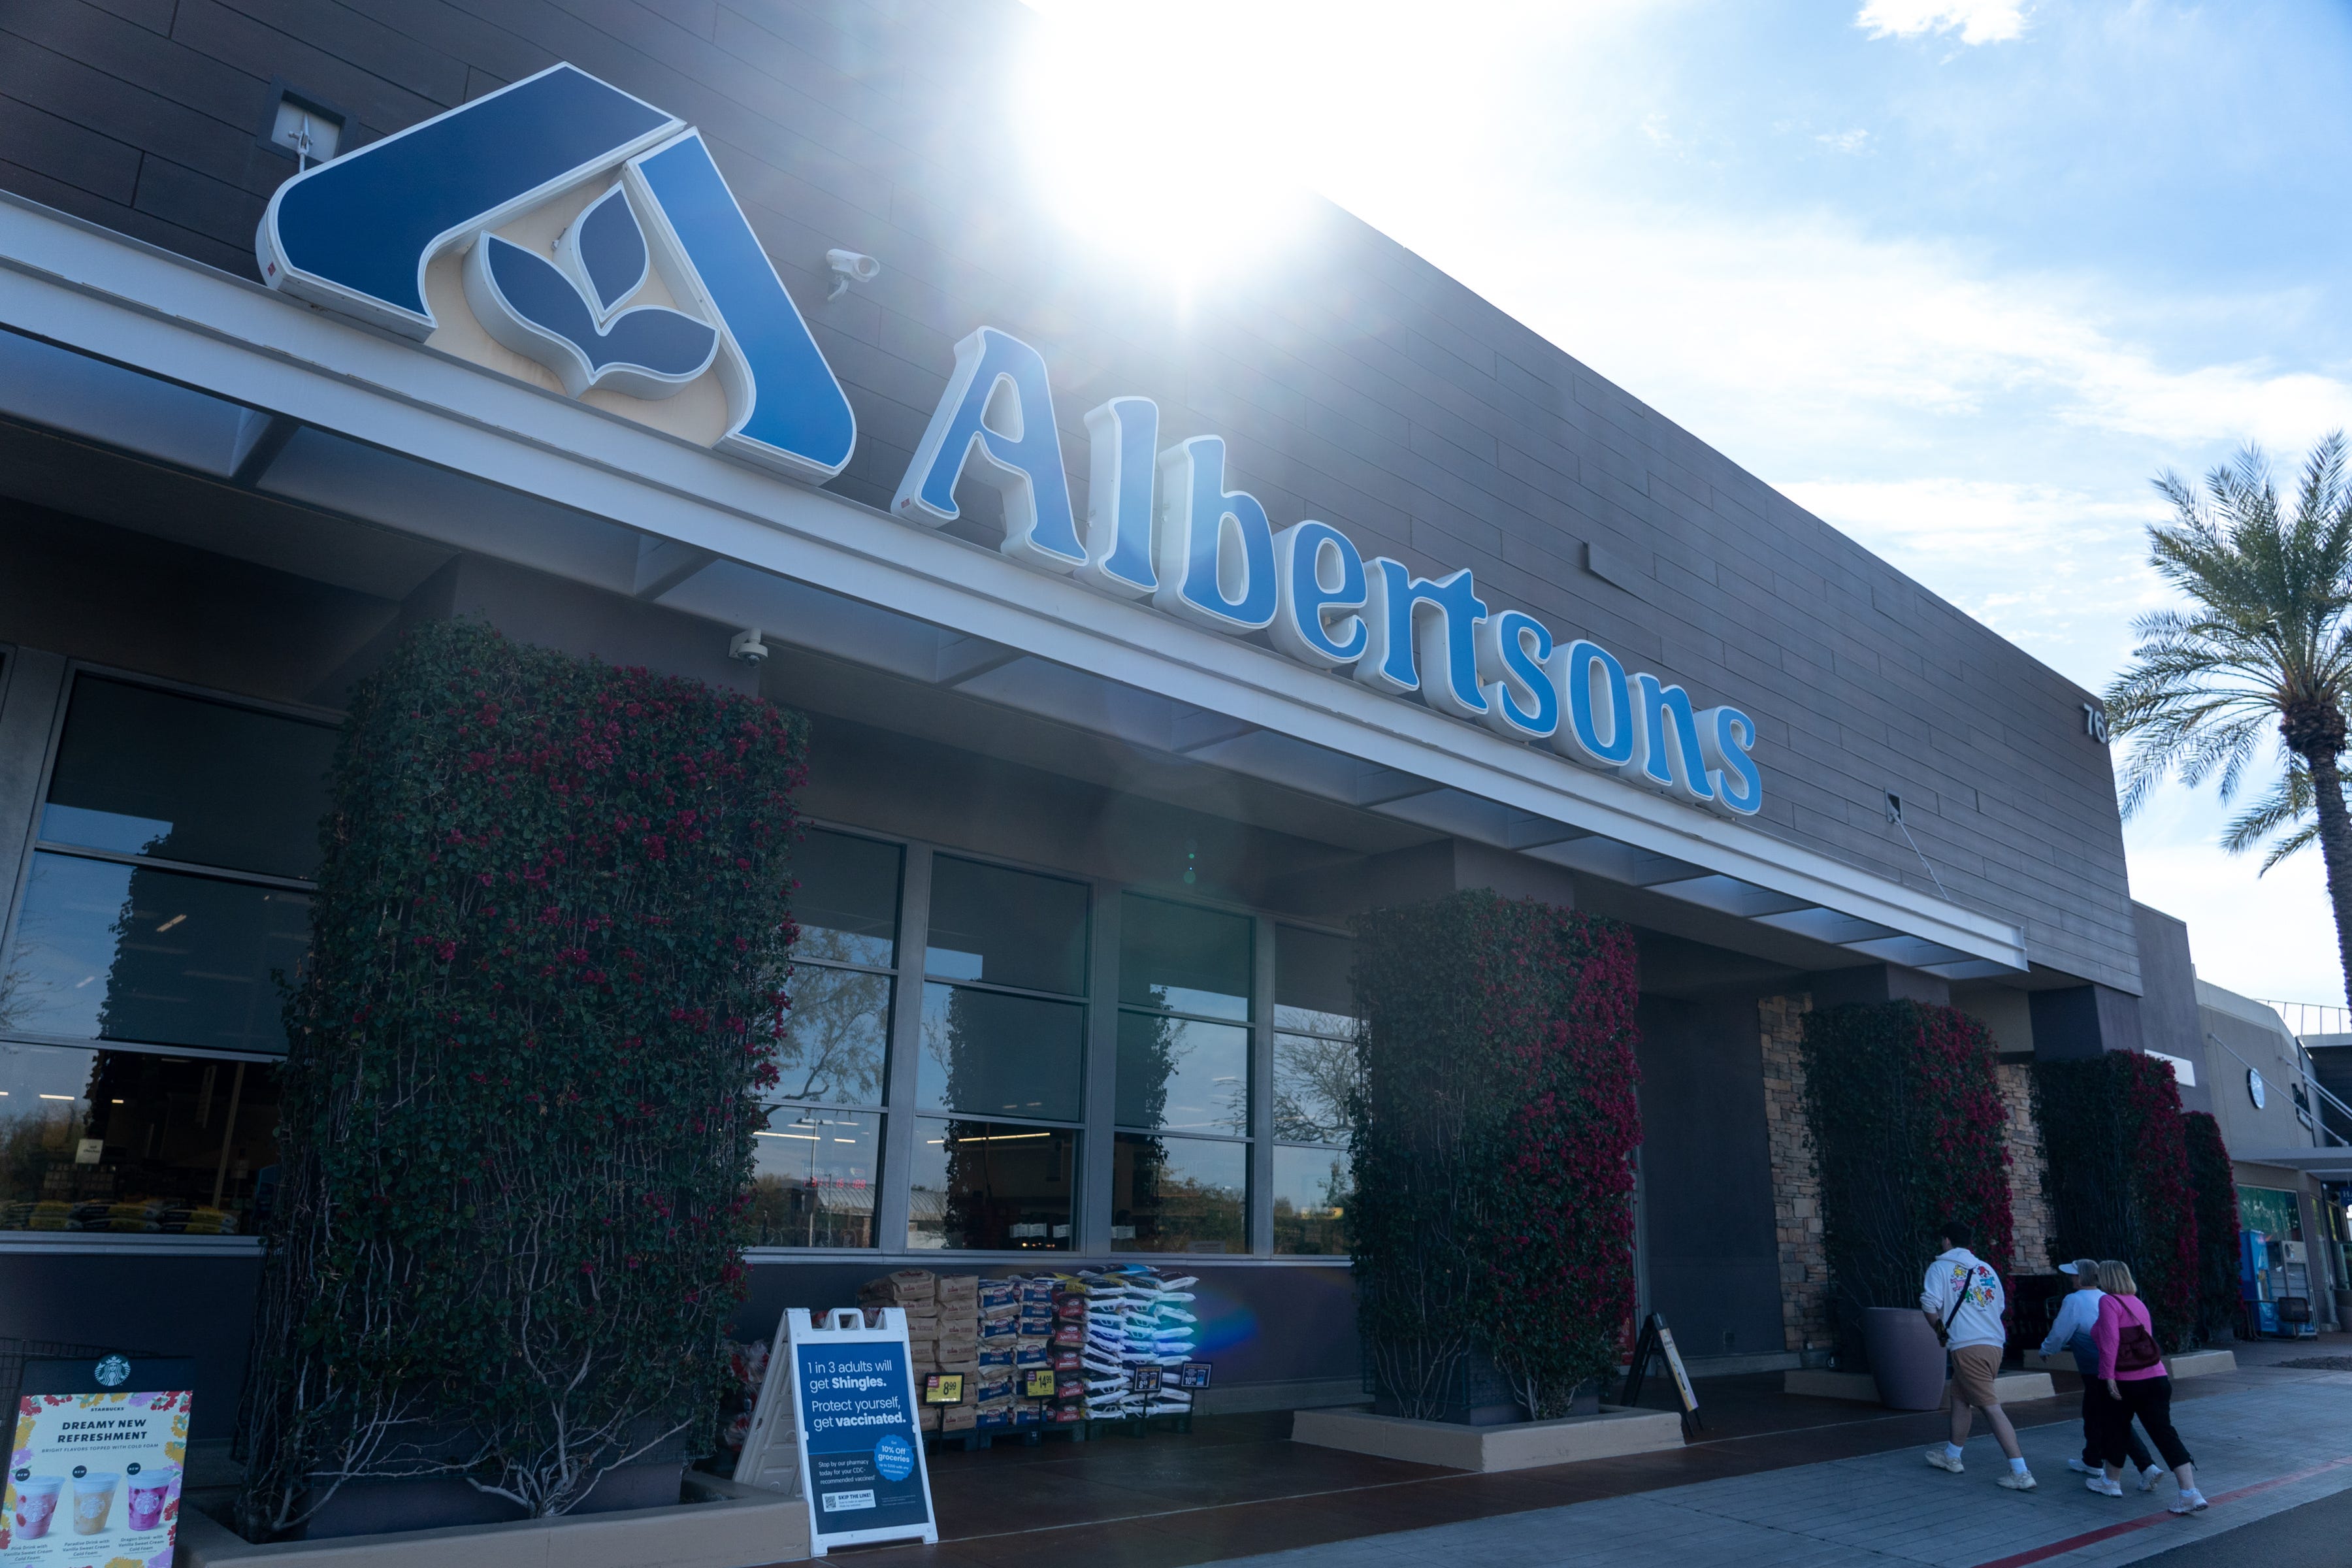 amazon, kroger: controversial albertsons merger means lower prices and better stores